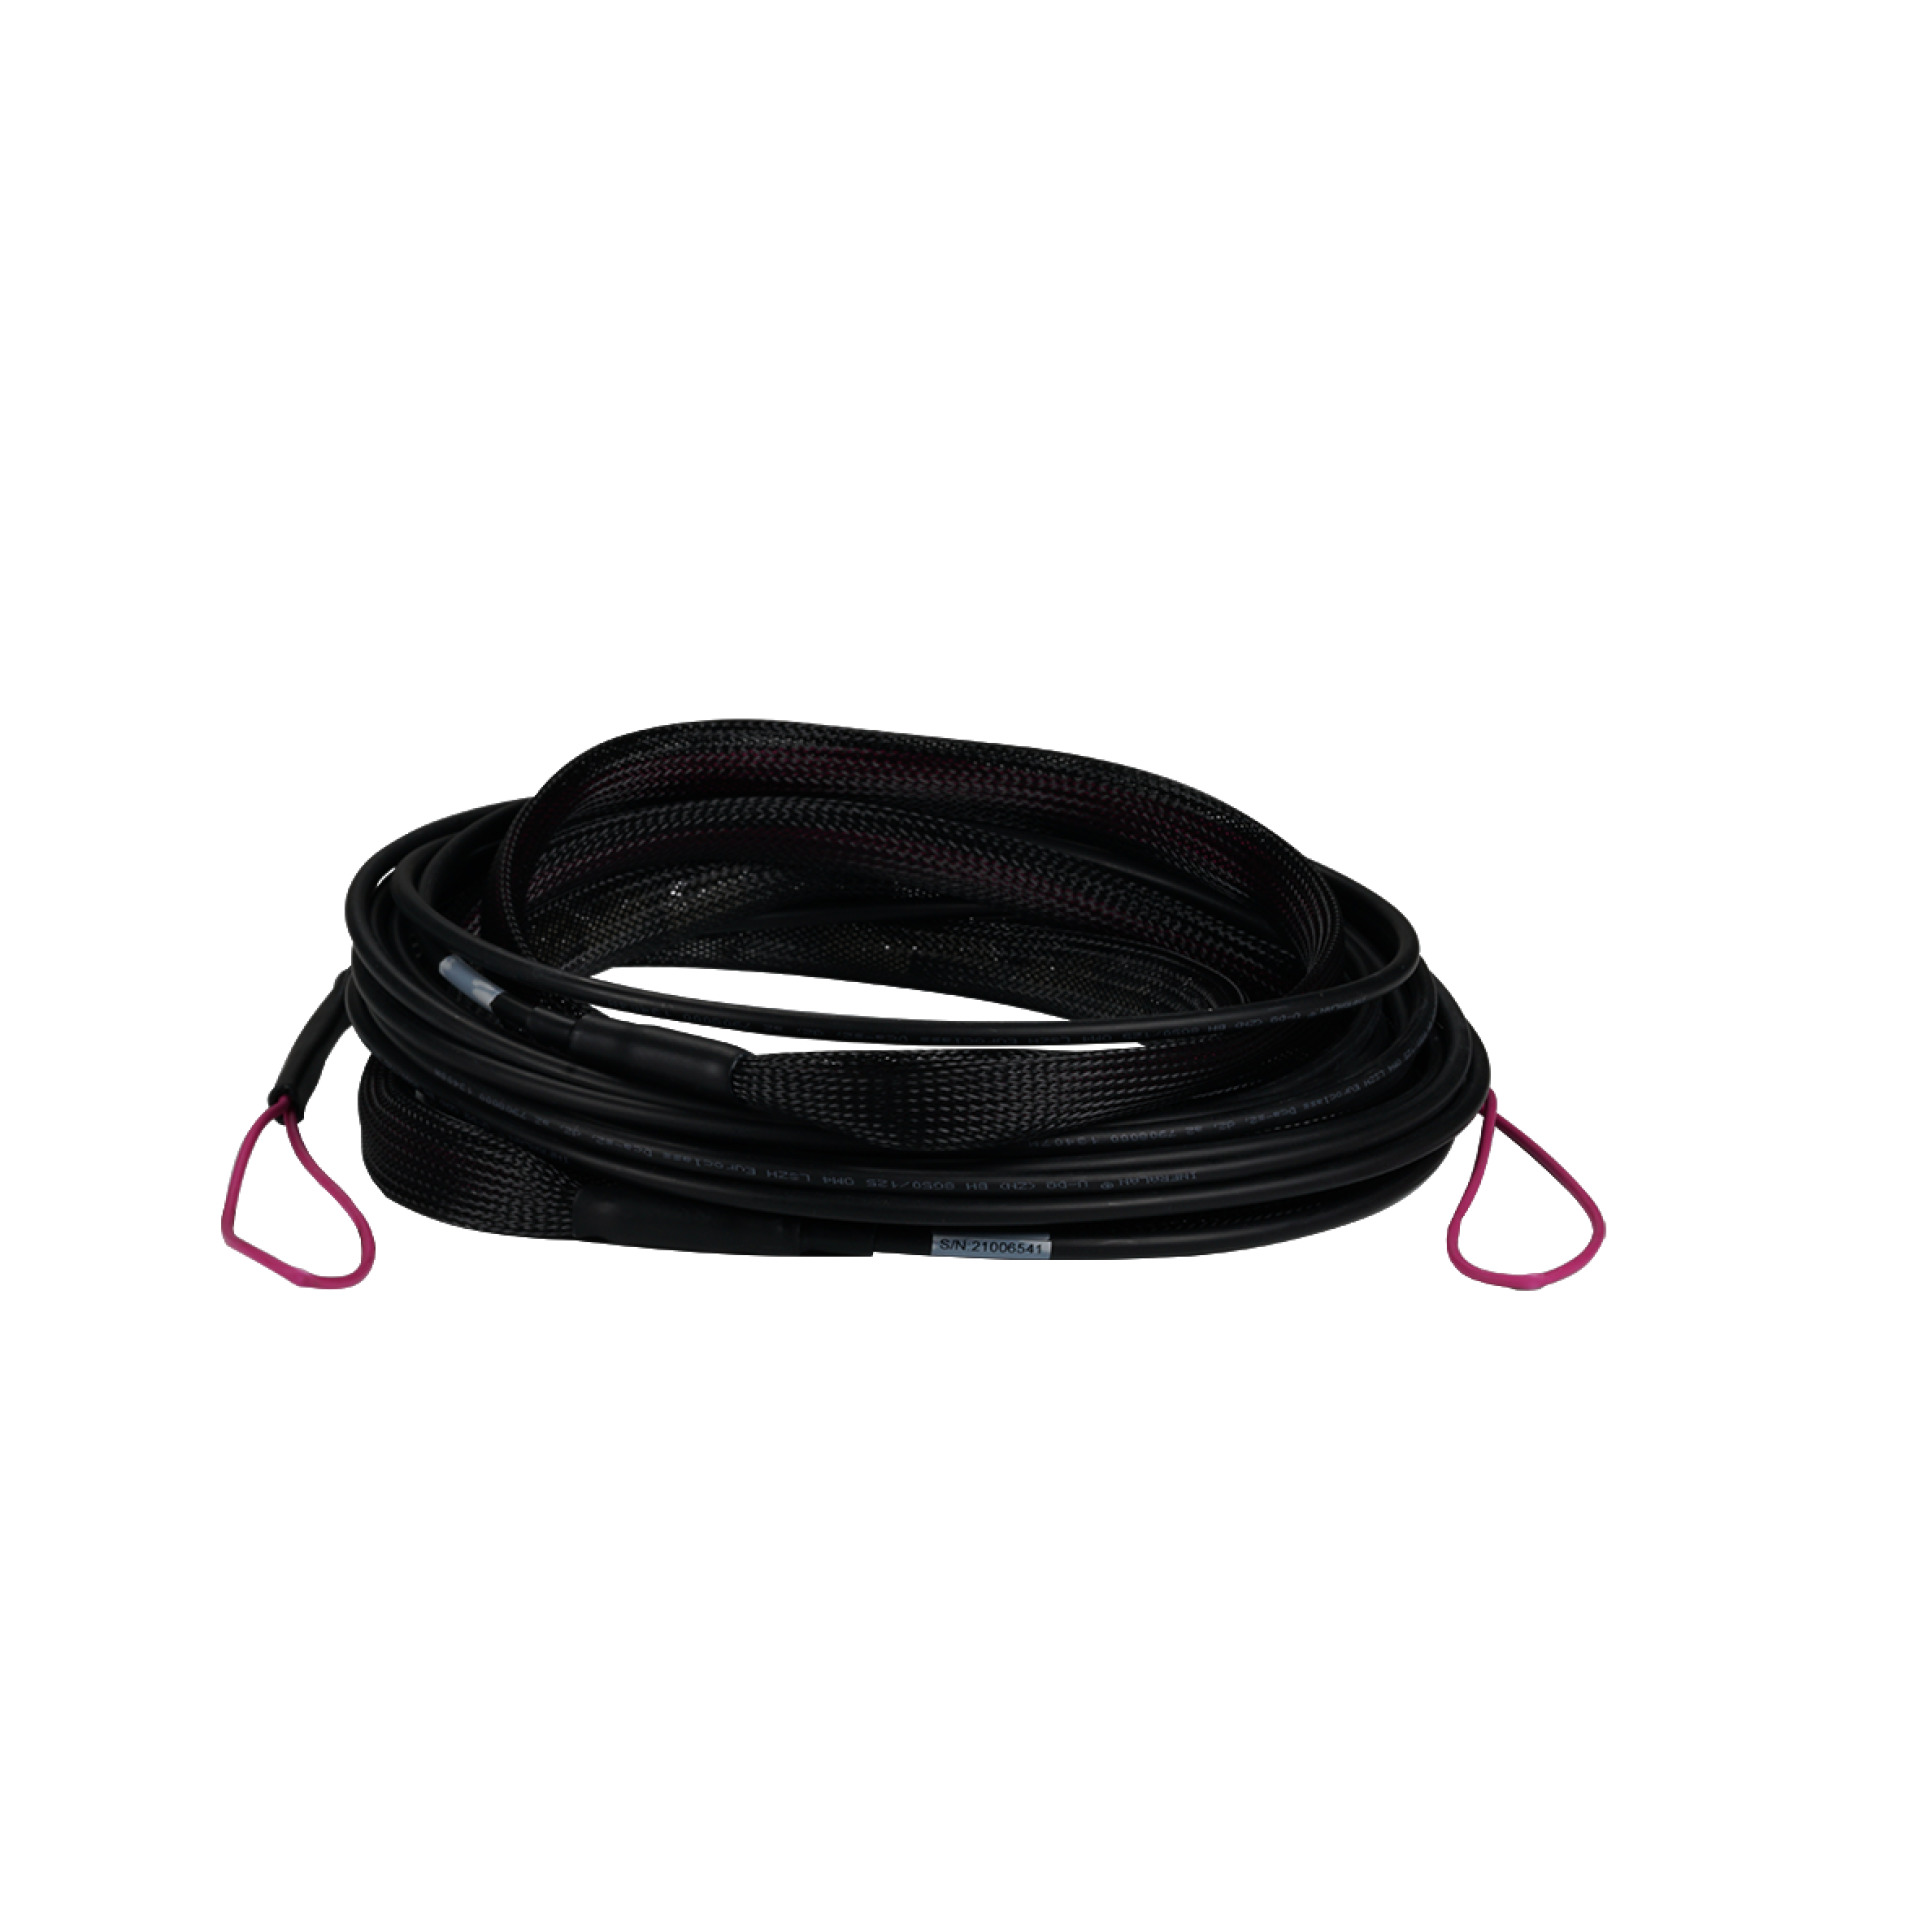 Trunk cable U-DQ(ZN)BH 4G 50/125, SC/SC OM4 50m